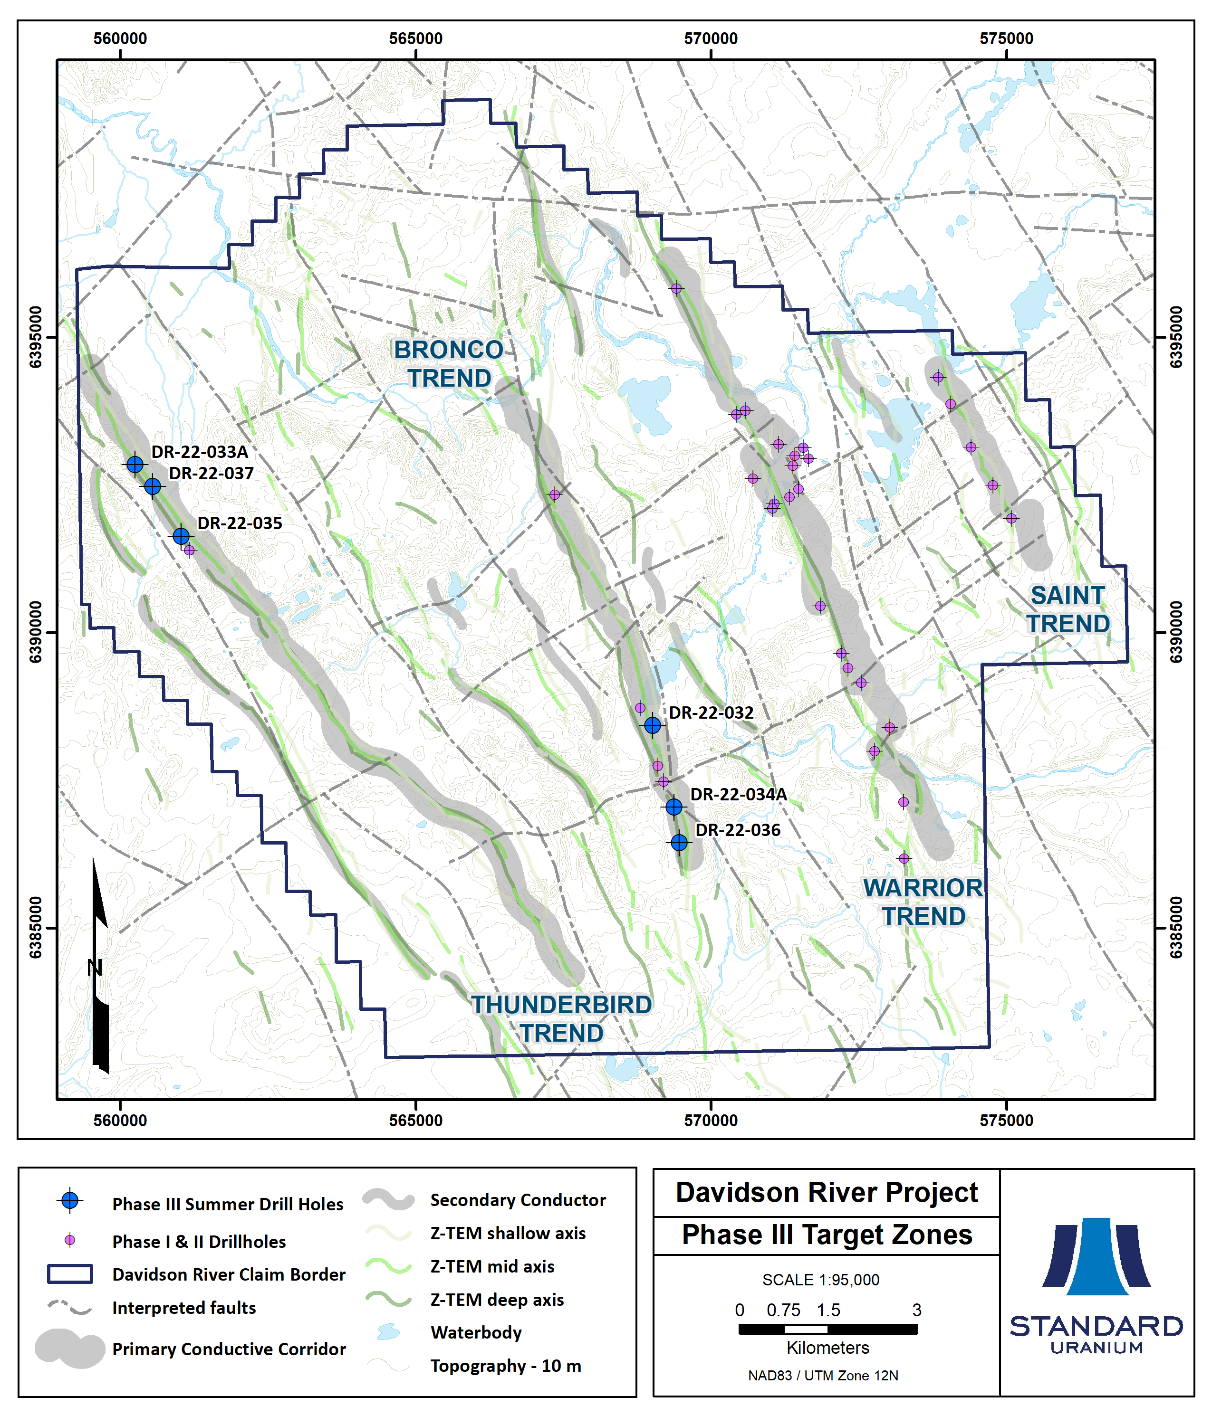 Standard Uranium Provides Davidson River Drill Program Update and Announces Closing of First Tranche of Brokered Private Placement For C$3.15 Million